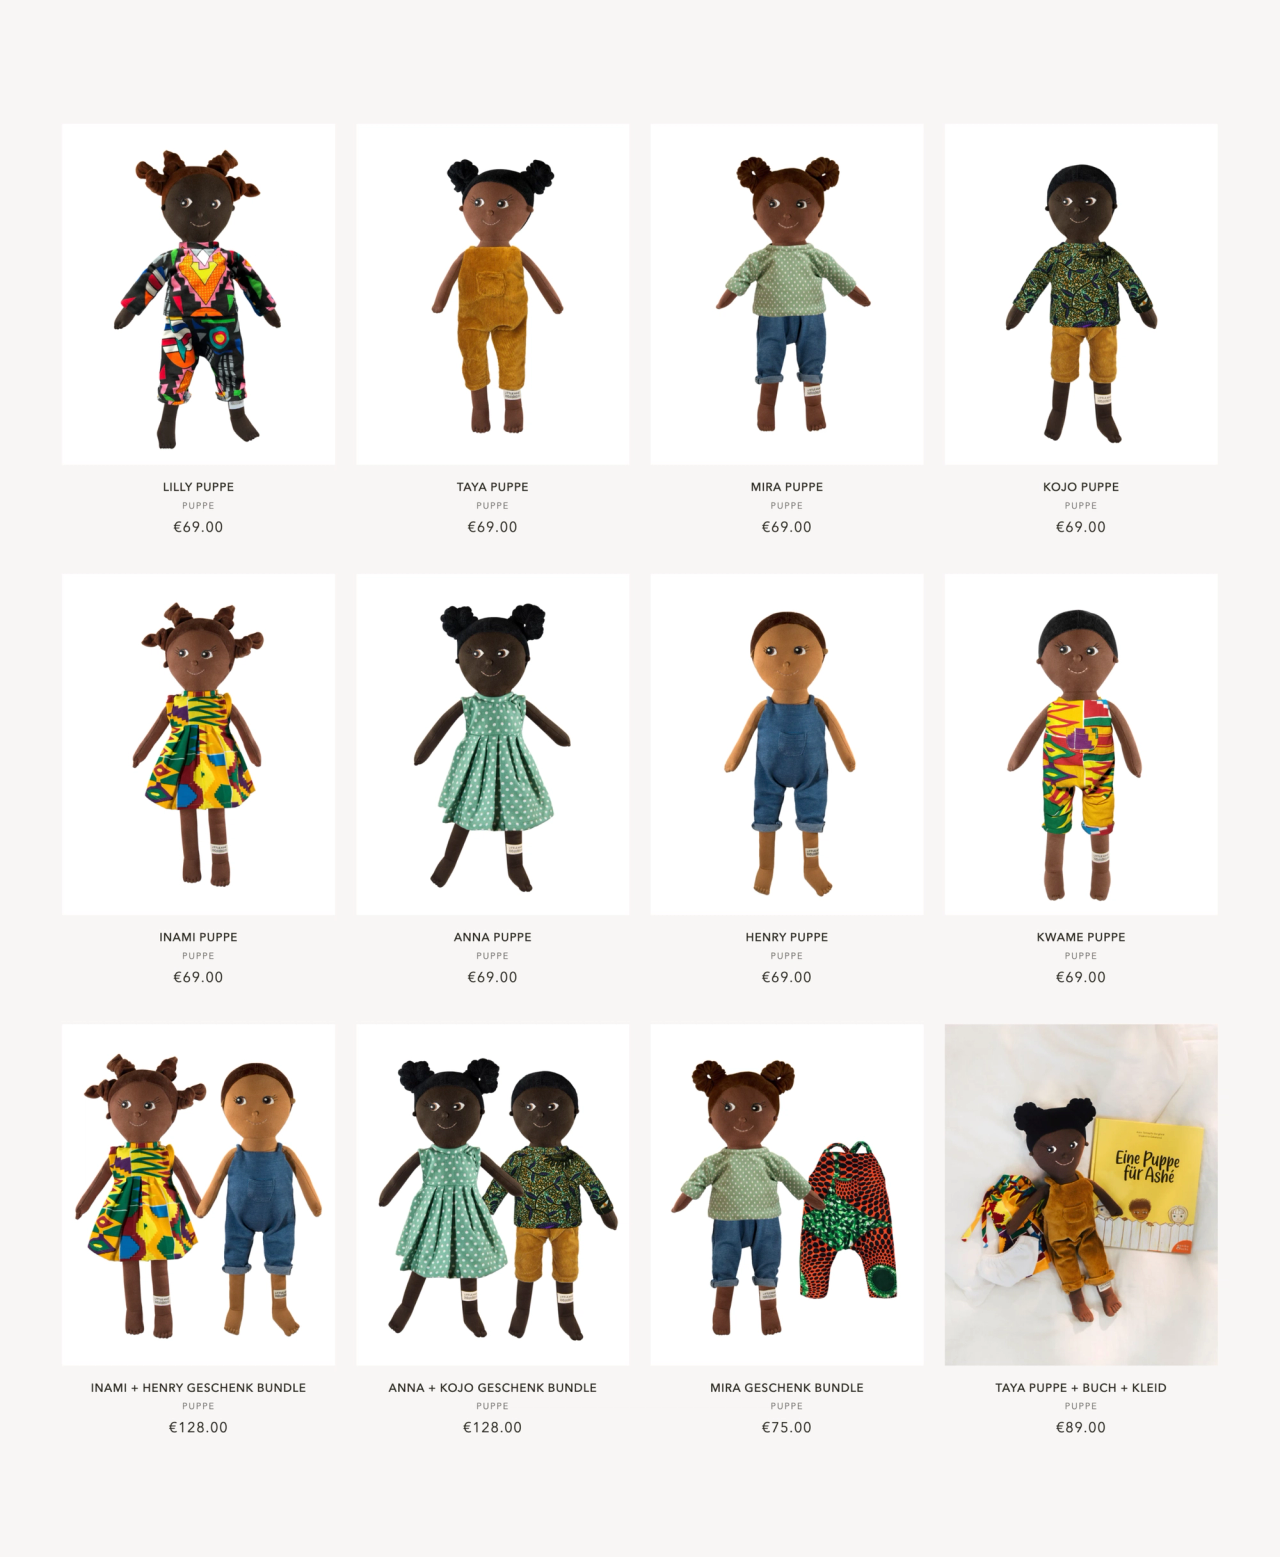 The website's doll collection grid page